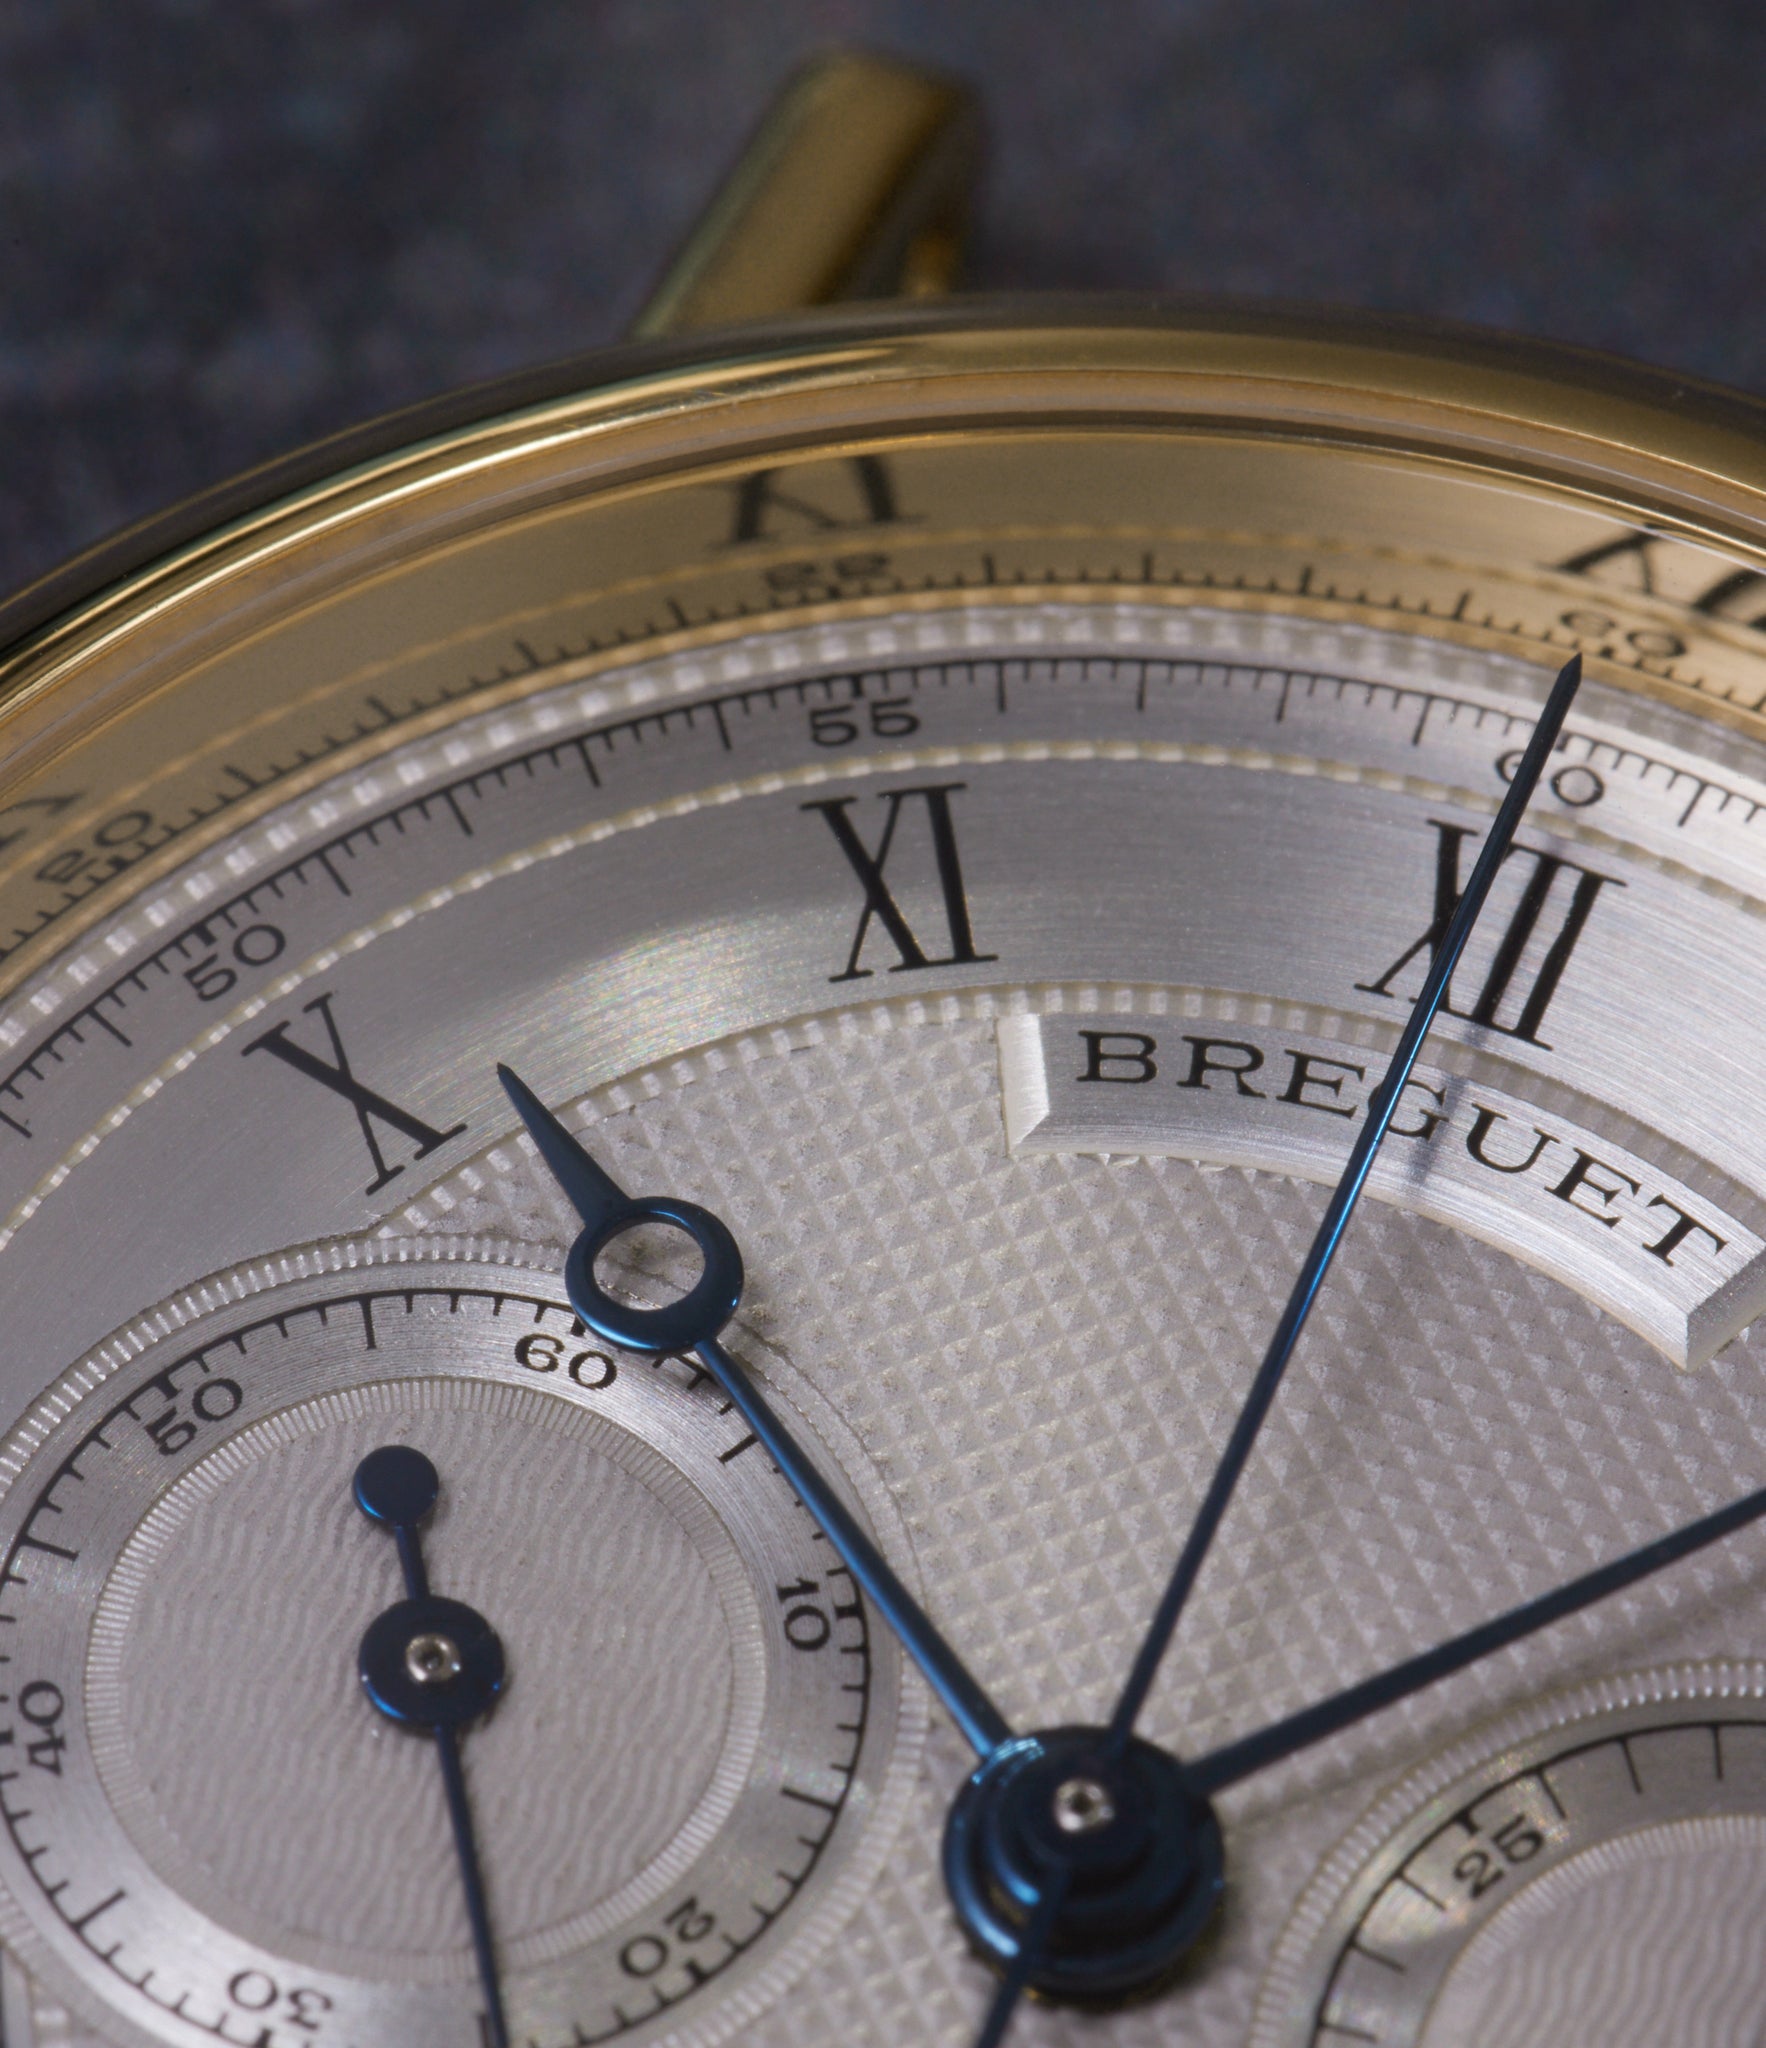 Breguet Chronograph | Ref. 3237 | Yellow Gold | A Collected Man London